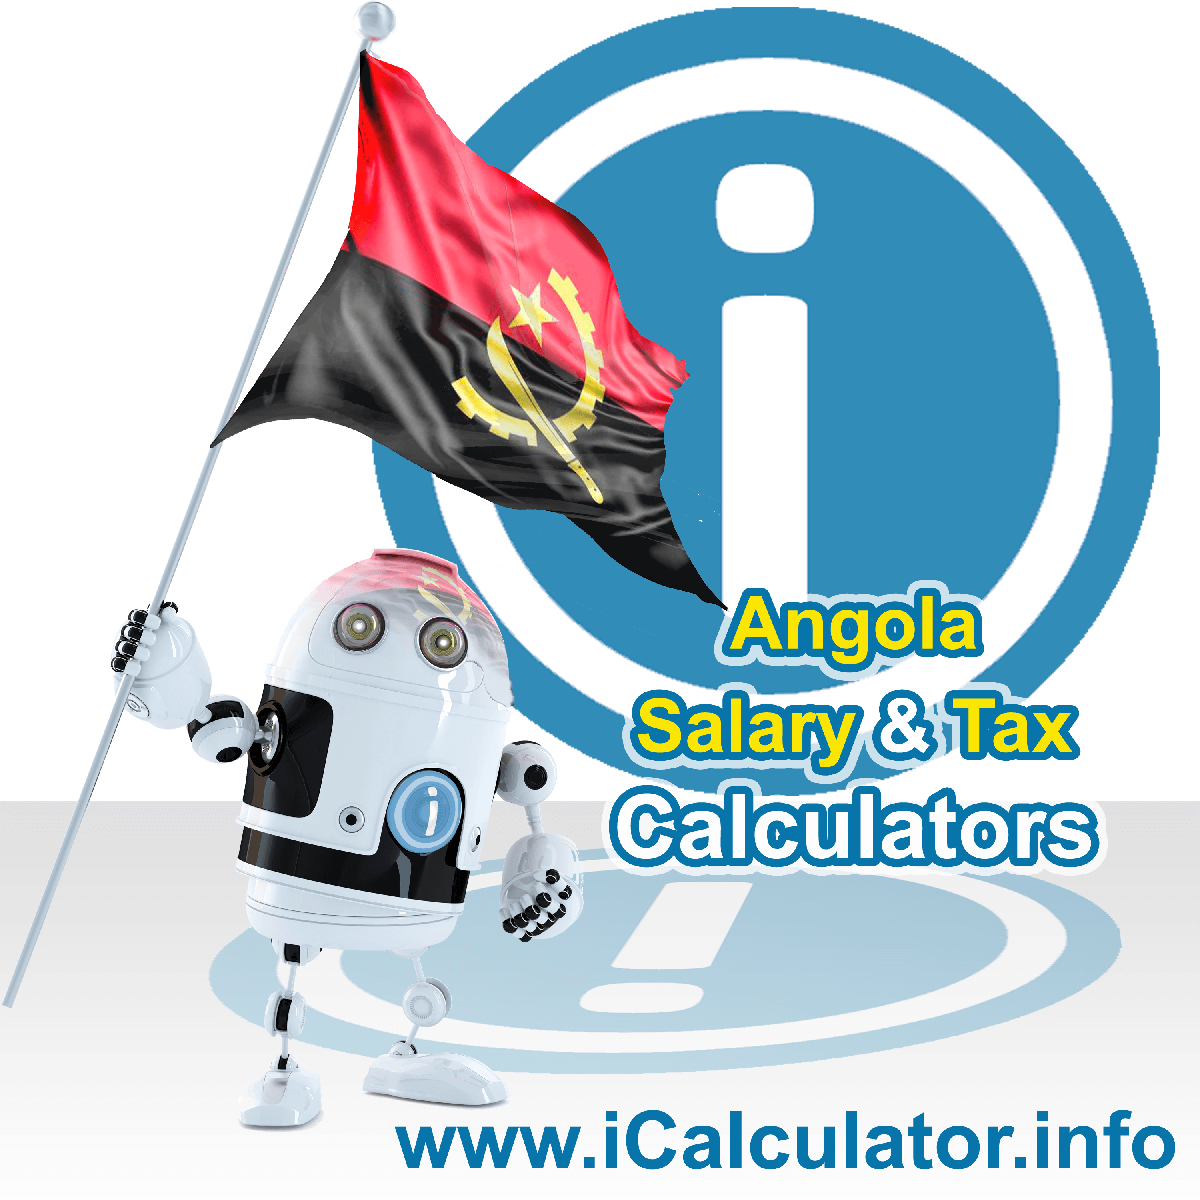 Angola Wage Calculator. This image shows the Angola flag and information relating to the tax formula for the Angola Tax Calculator